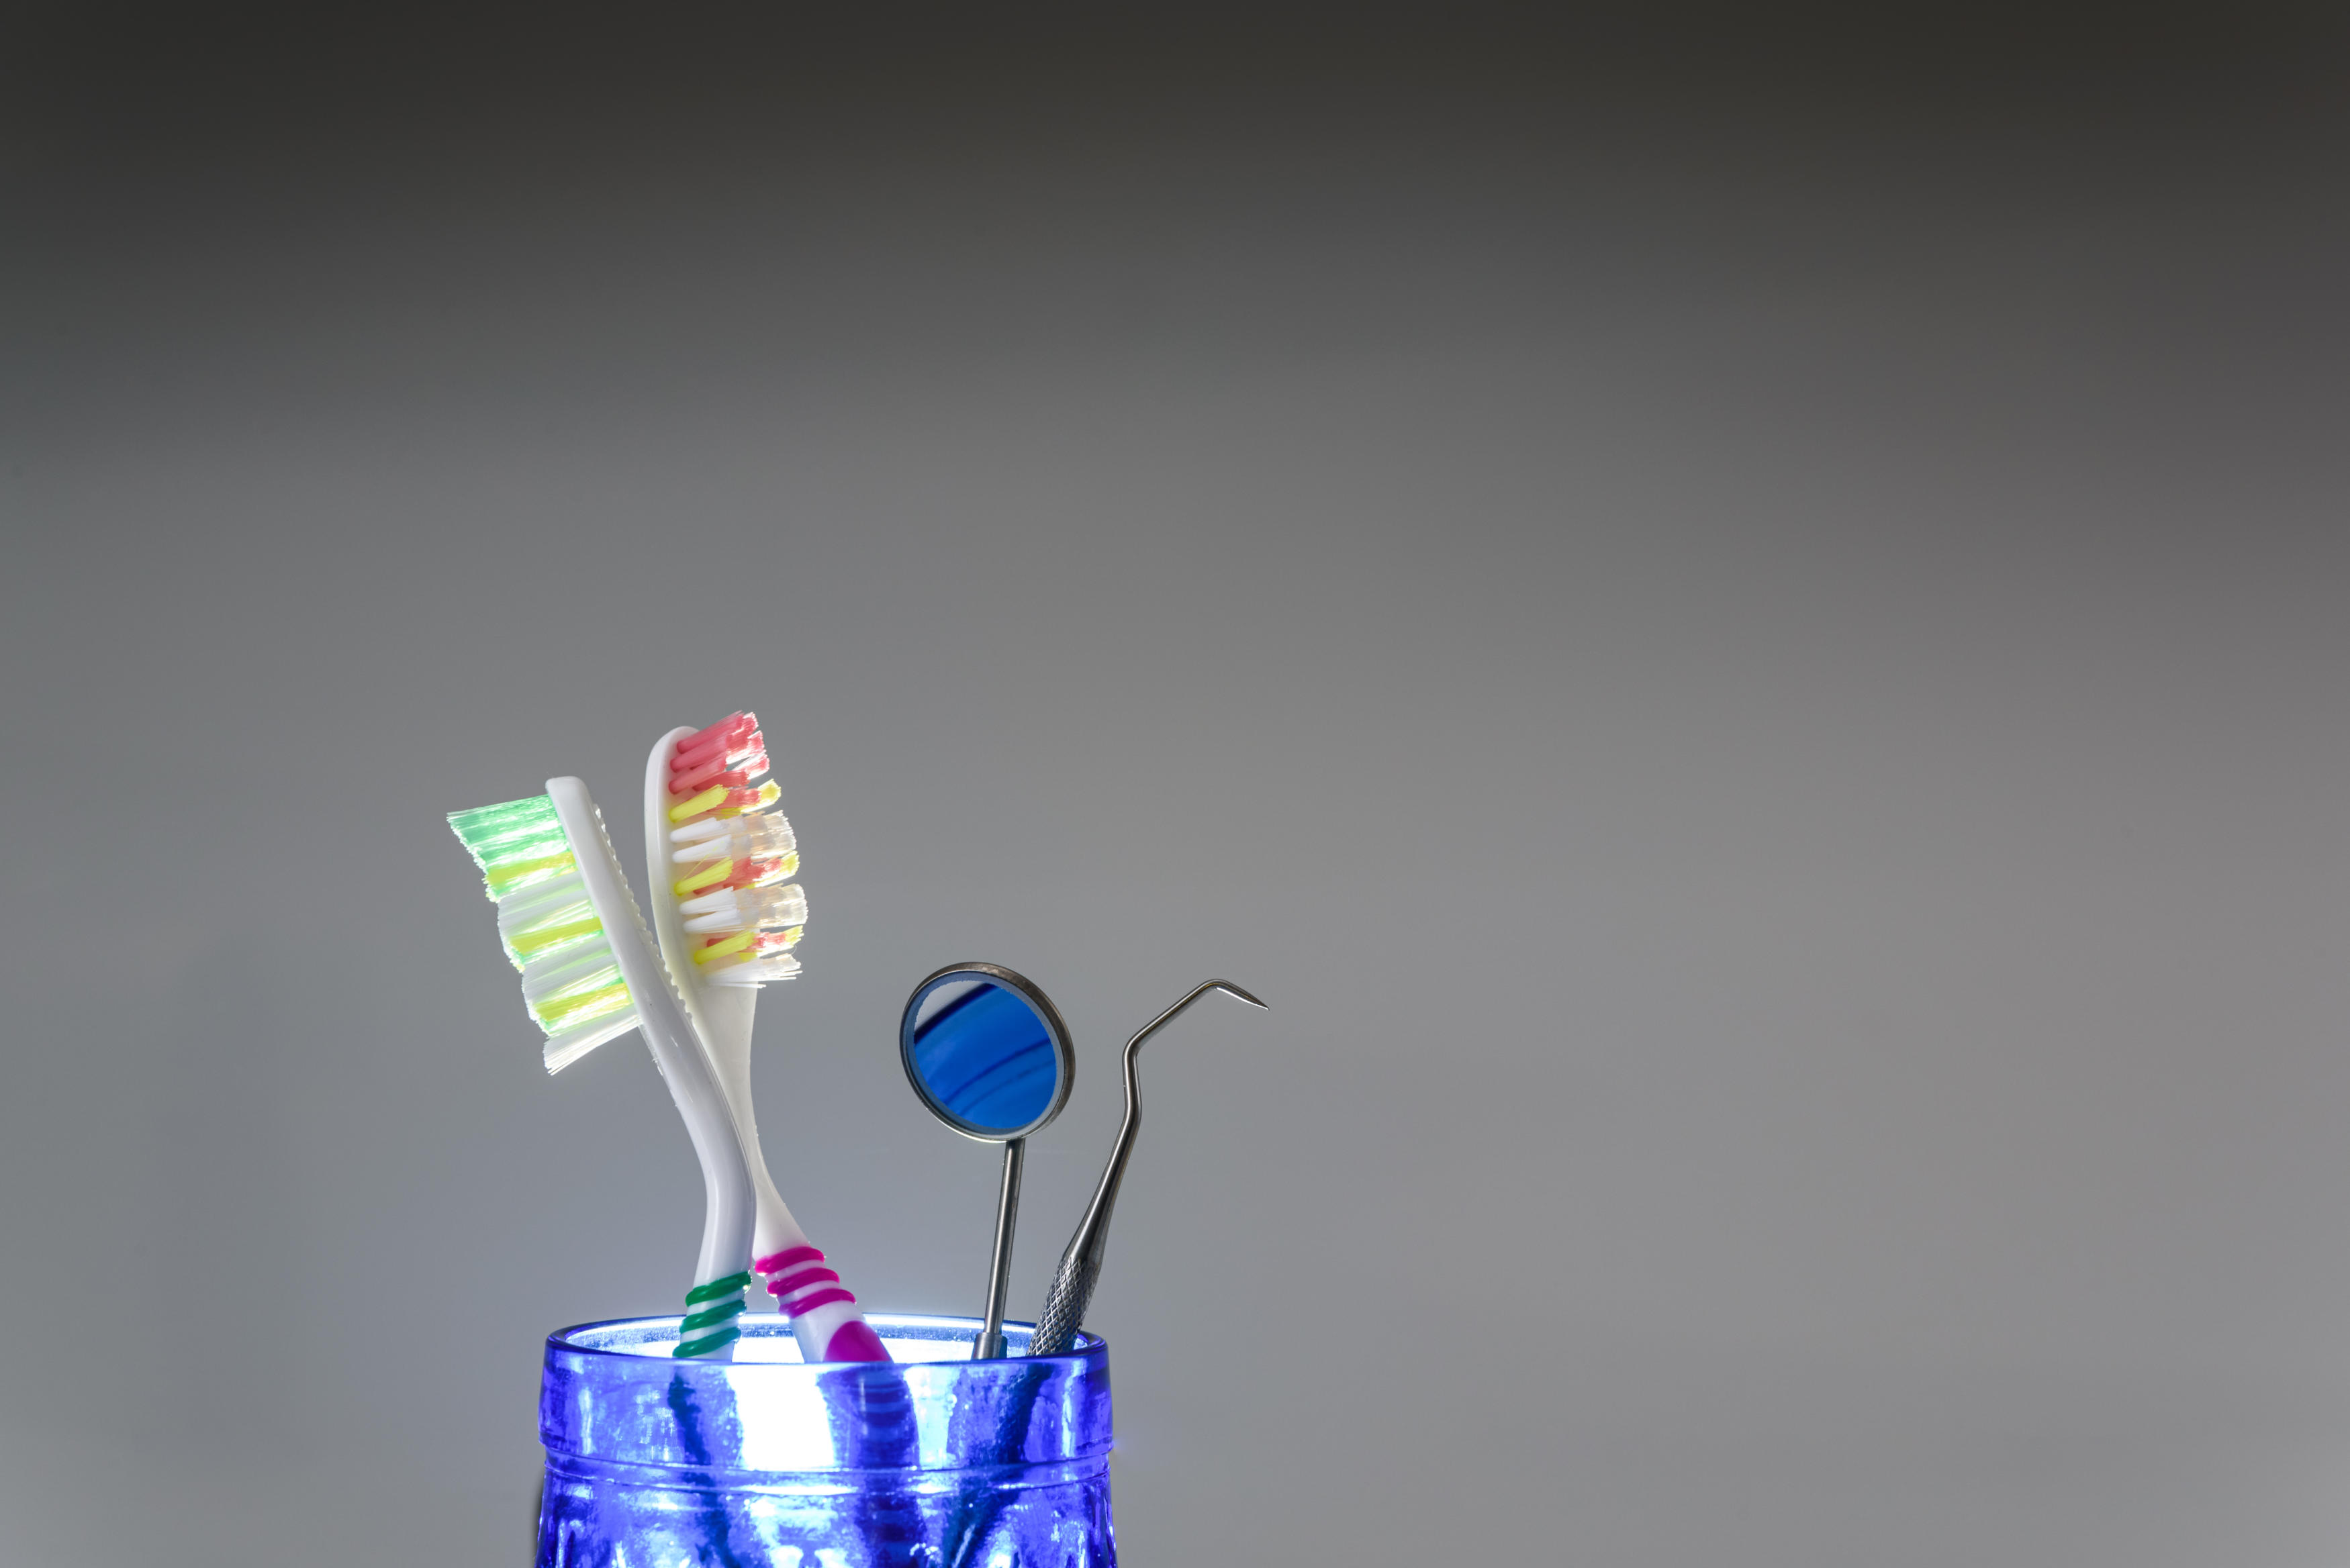 toothbrushes and dentist set isolated on gray back 2022 05 03 22 33 50 utc scaled